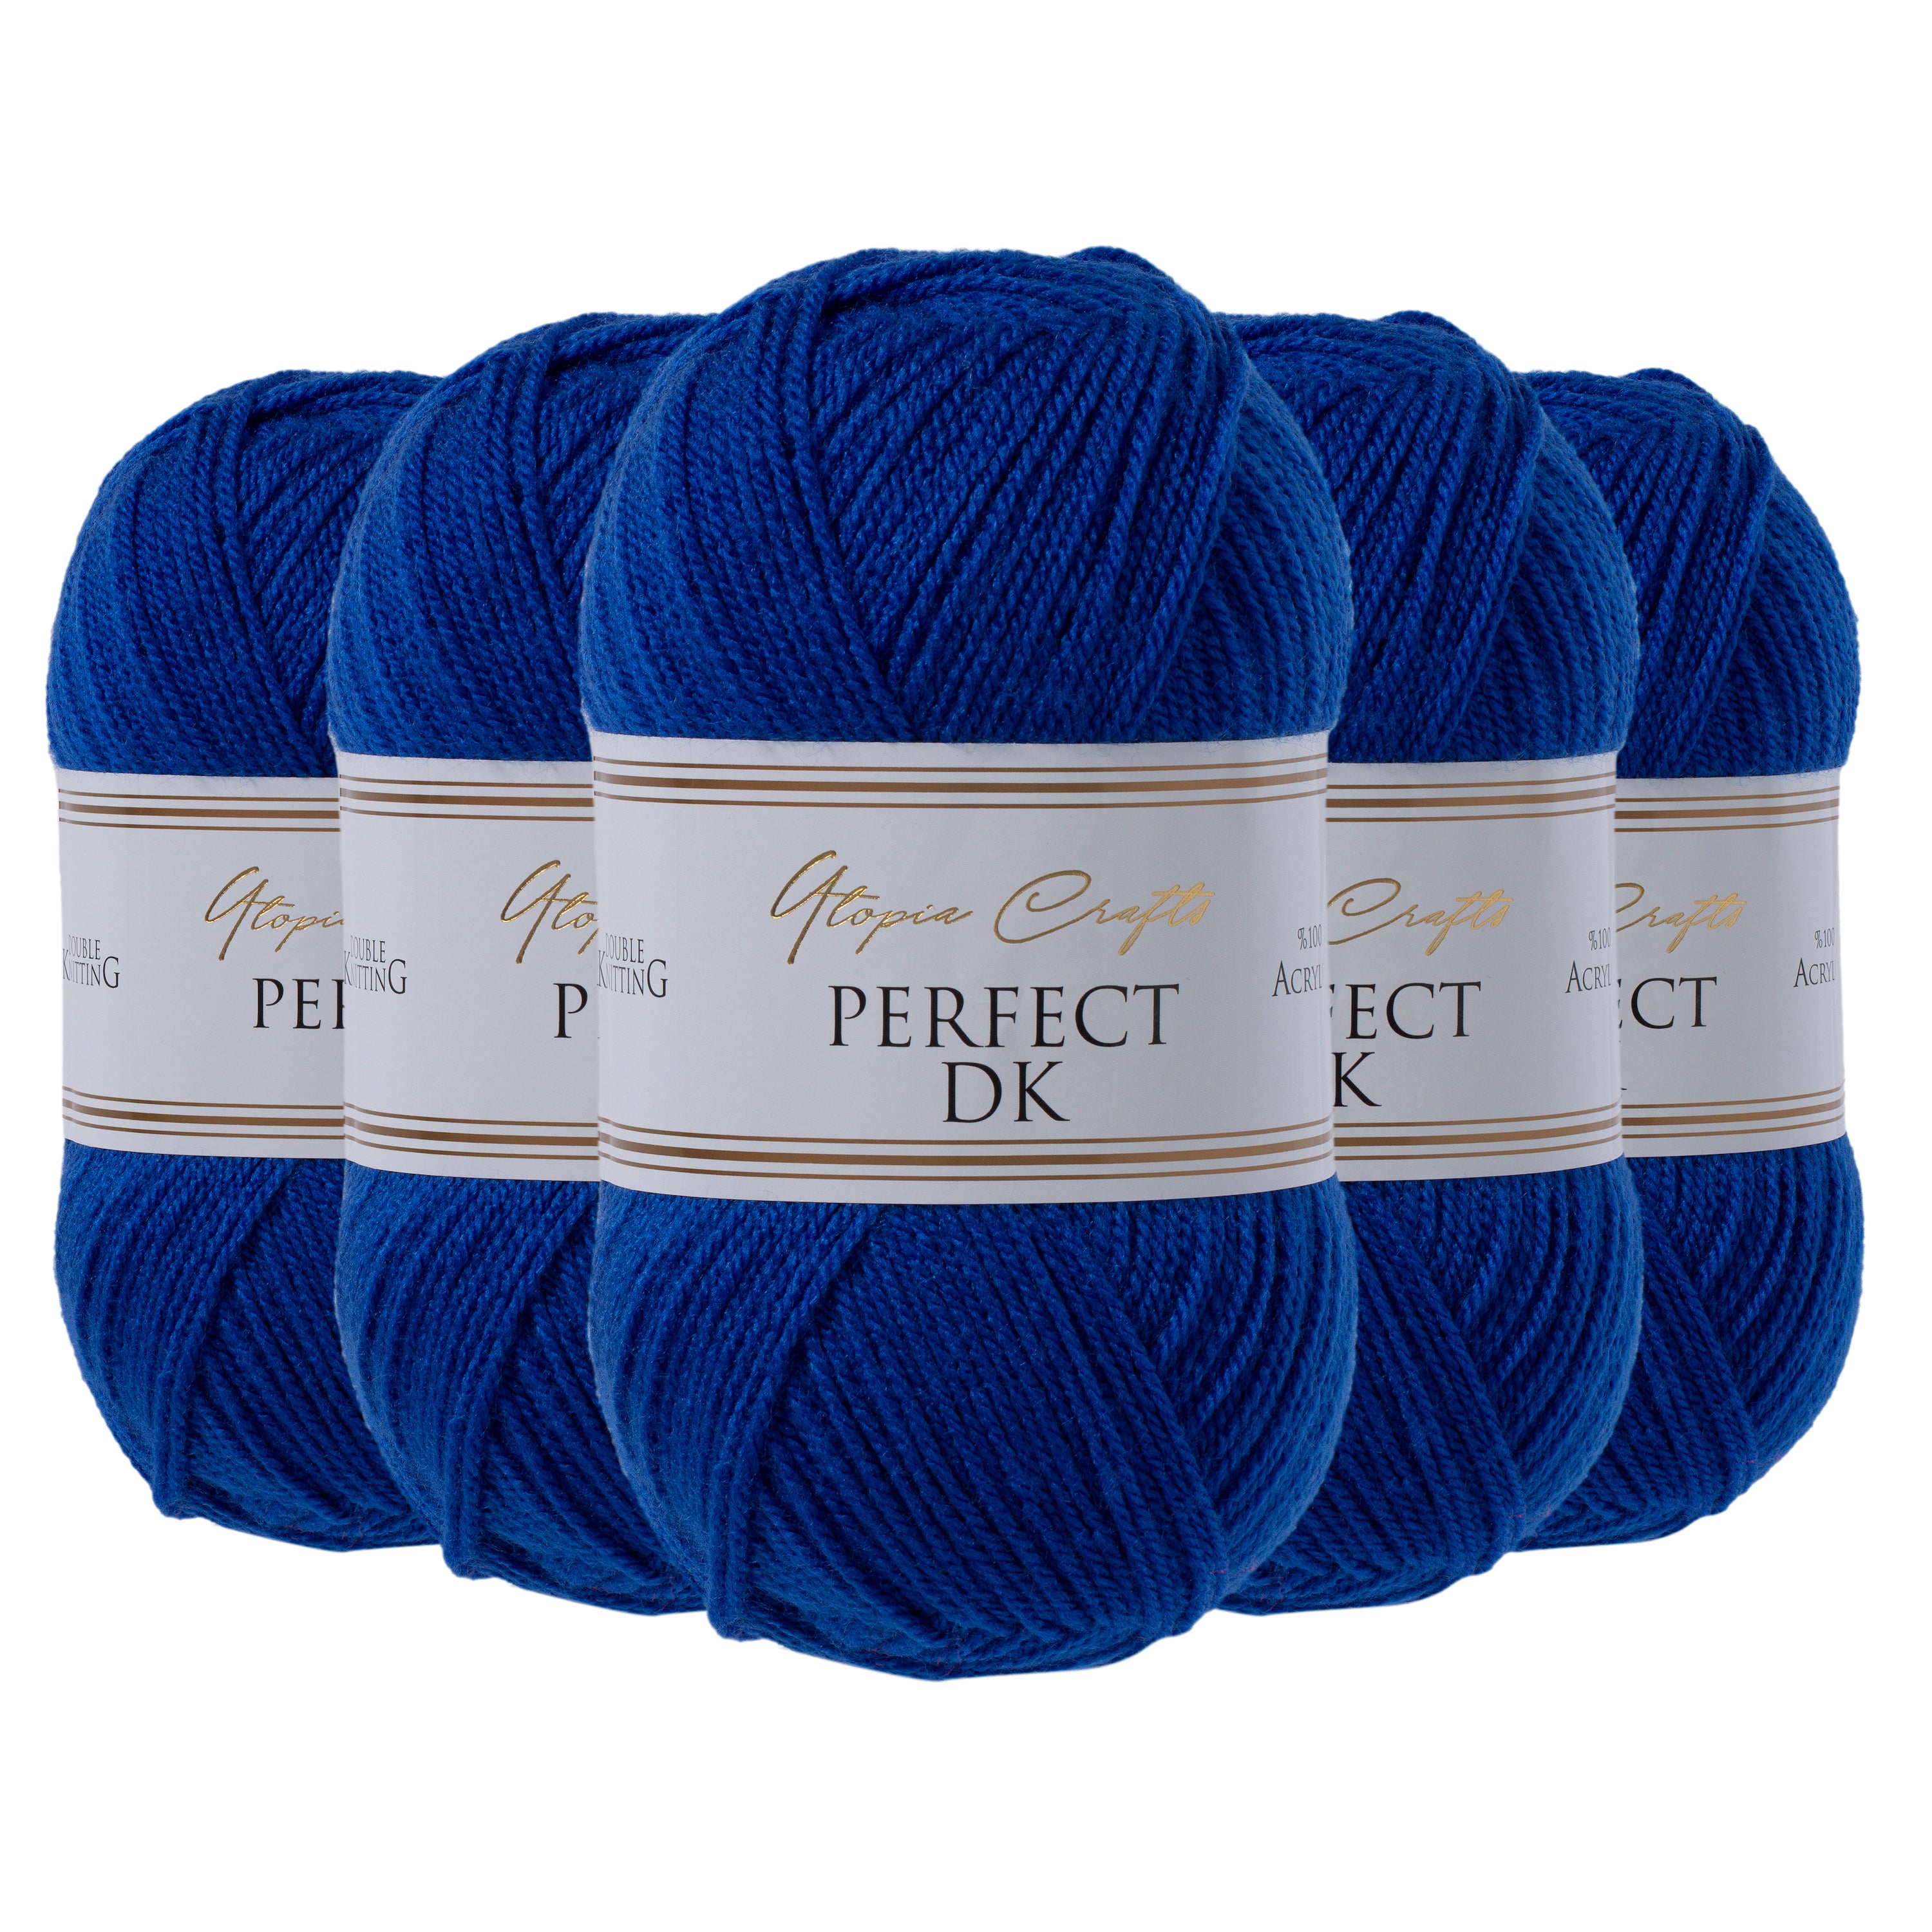 Utopia Crafts DK Double Knitting Yarn, 5x 100g [Medieval Blue]